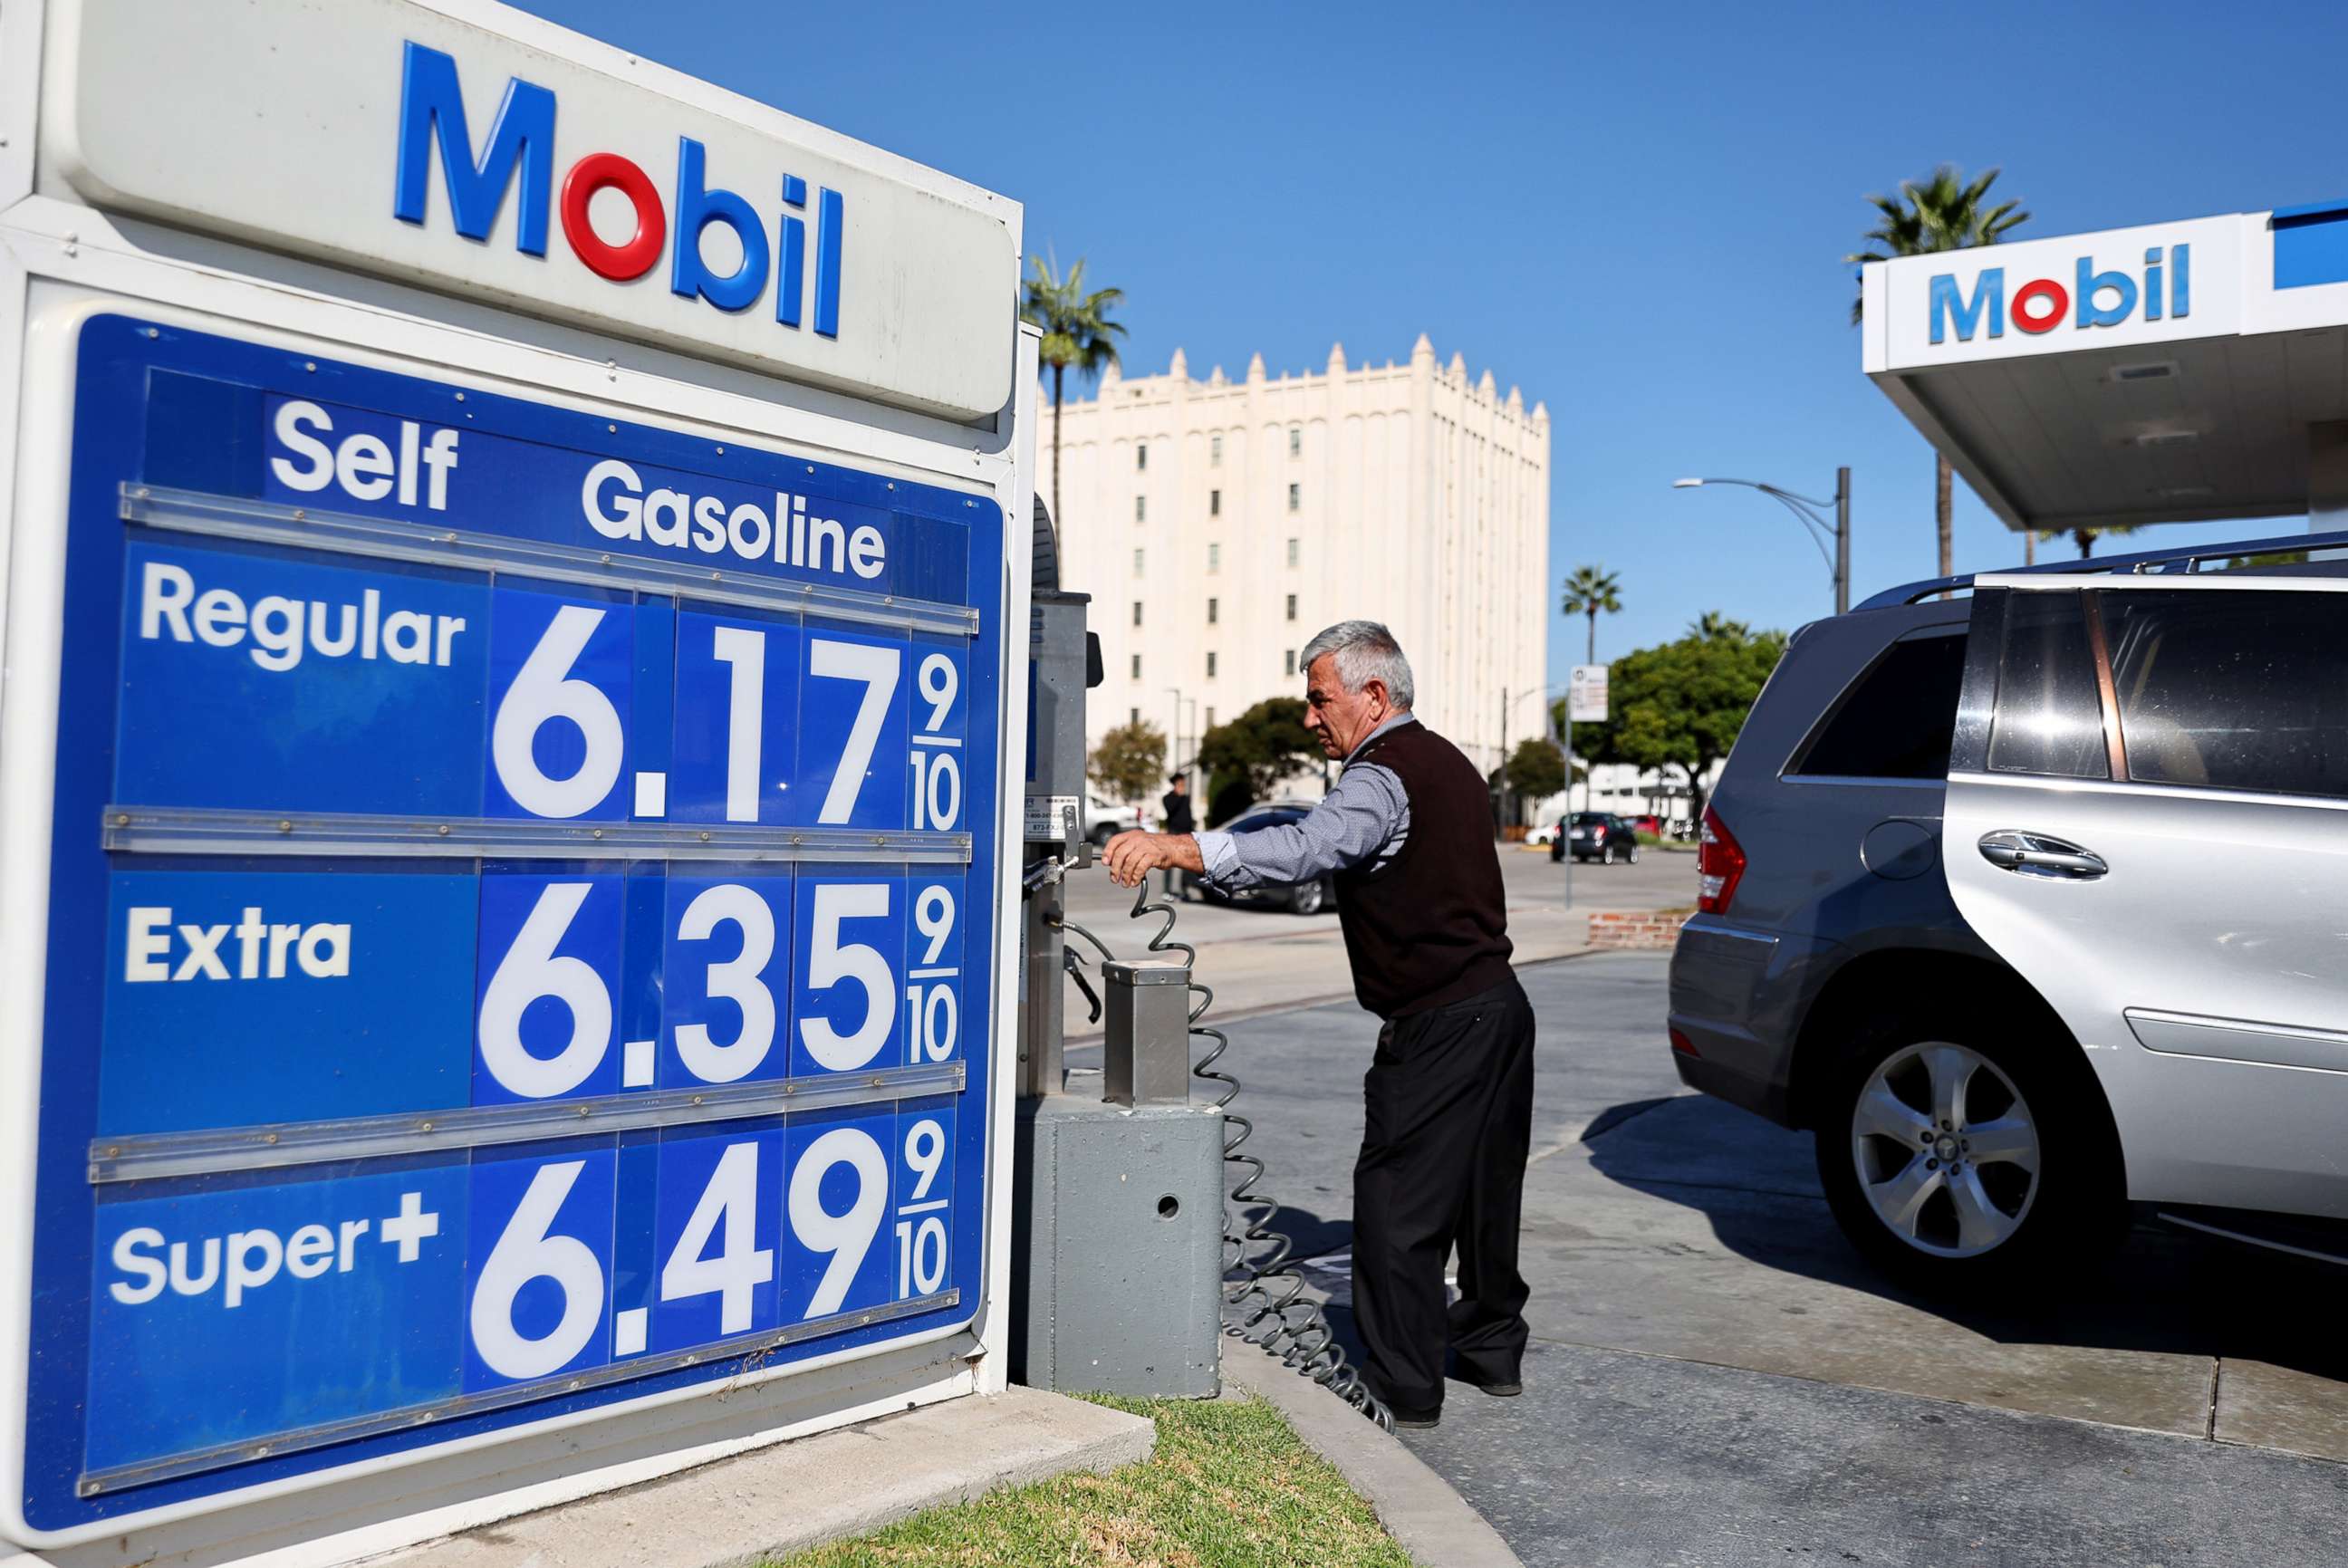 PHOTO: Gas prices are displayed at a Mobil gas station on Oct. 28, 2022 in Los Angeles.